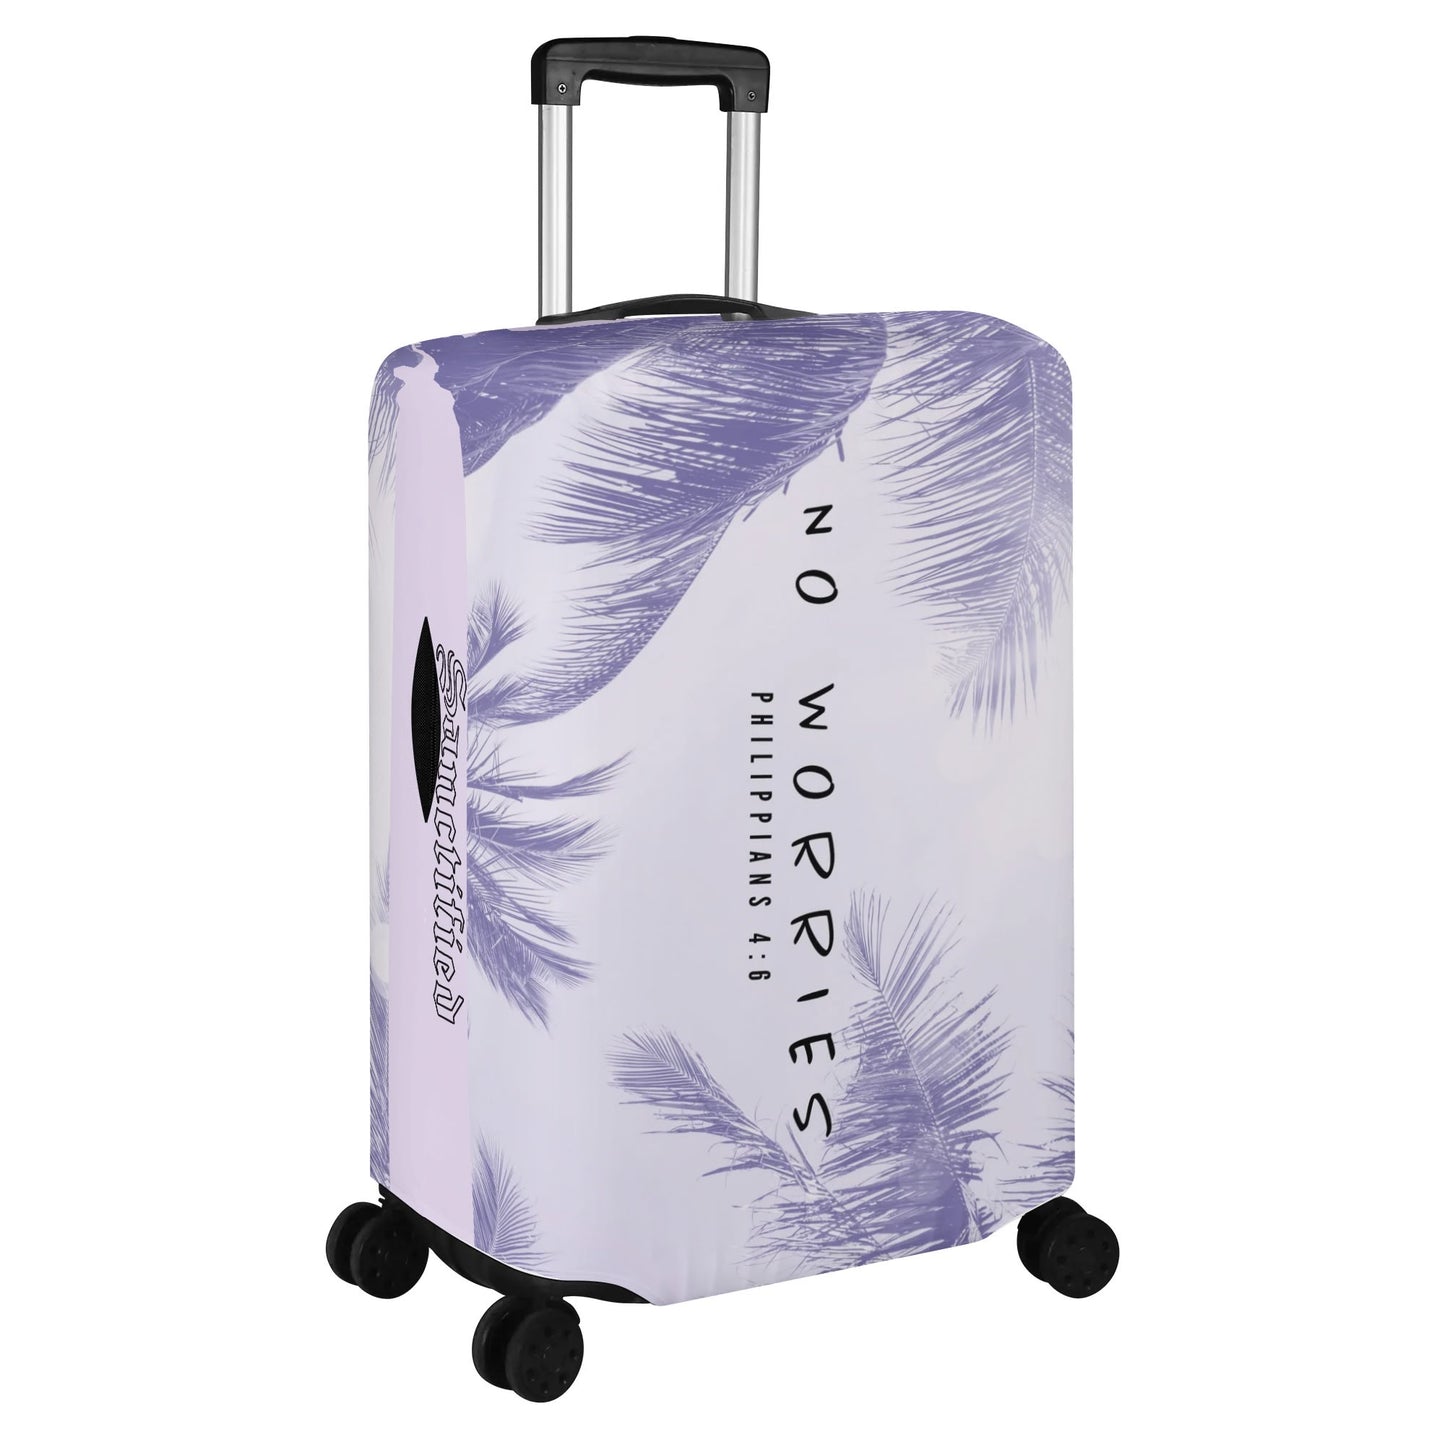 NO WORRIES- Polyester Luggage Cover, FREE SHIPPING